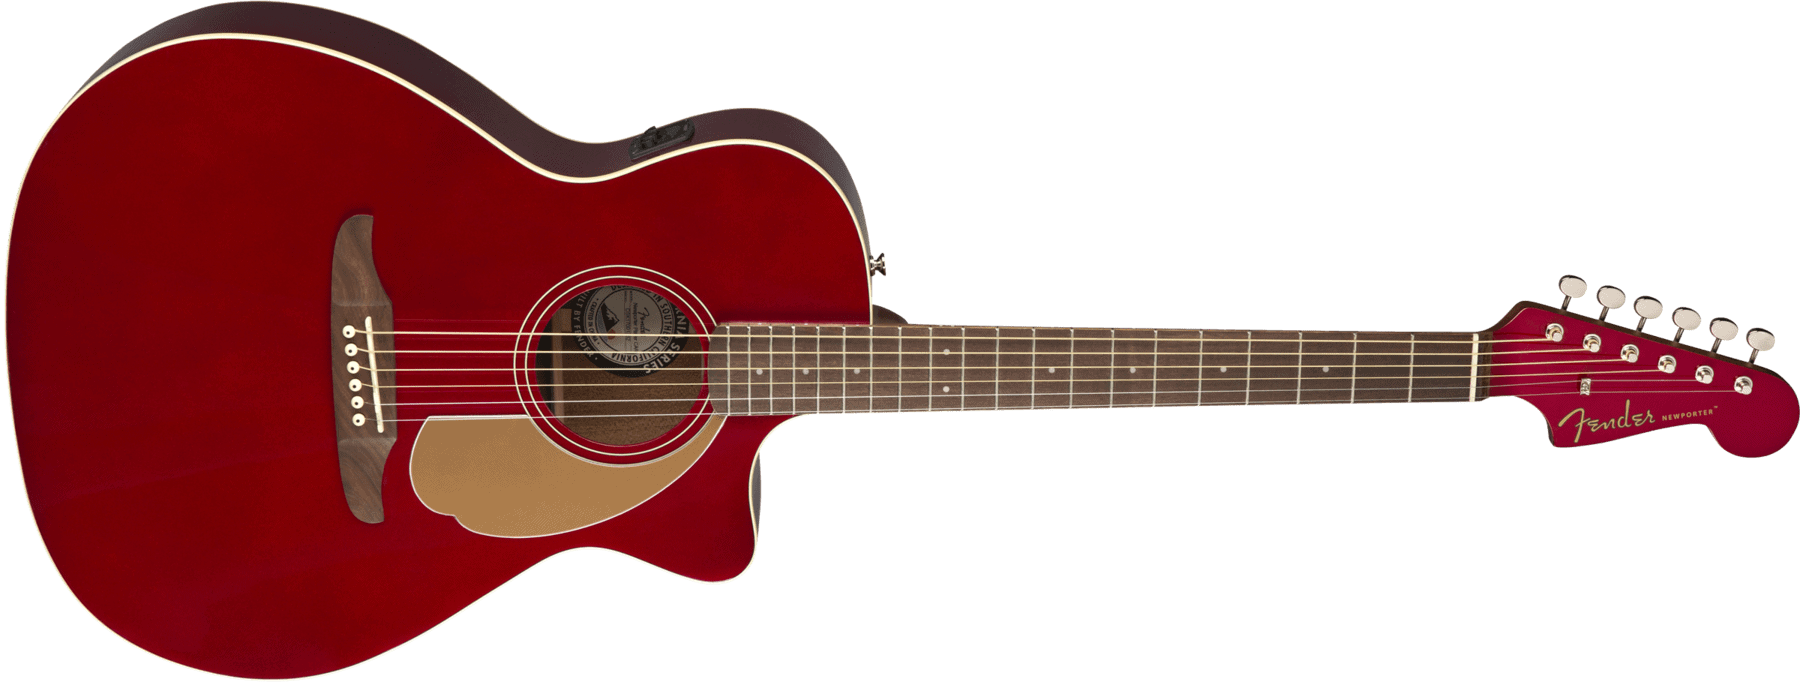 Out Of Stock - Fender Newporter Player, Candy Apple Red - Black Dot Music